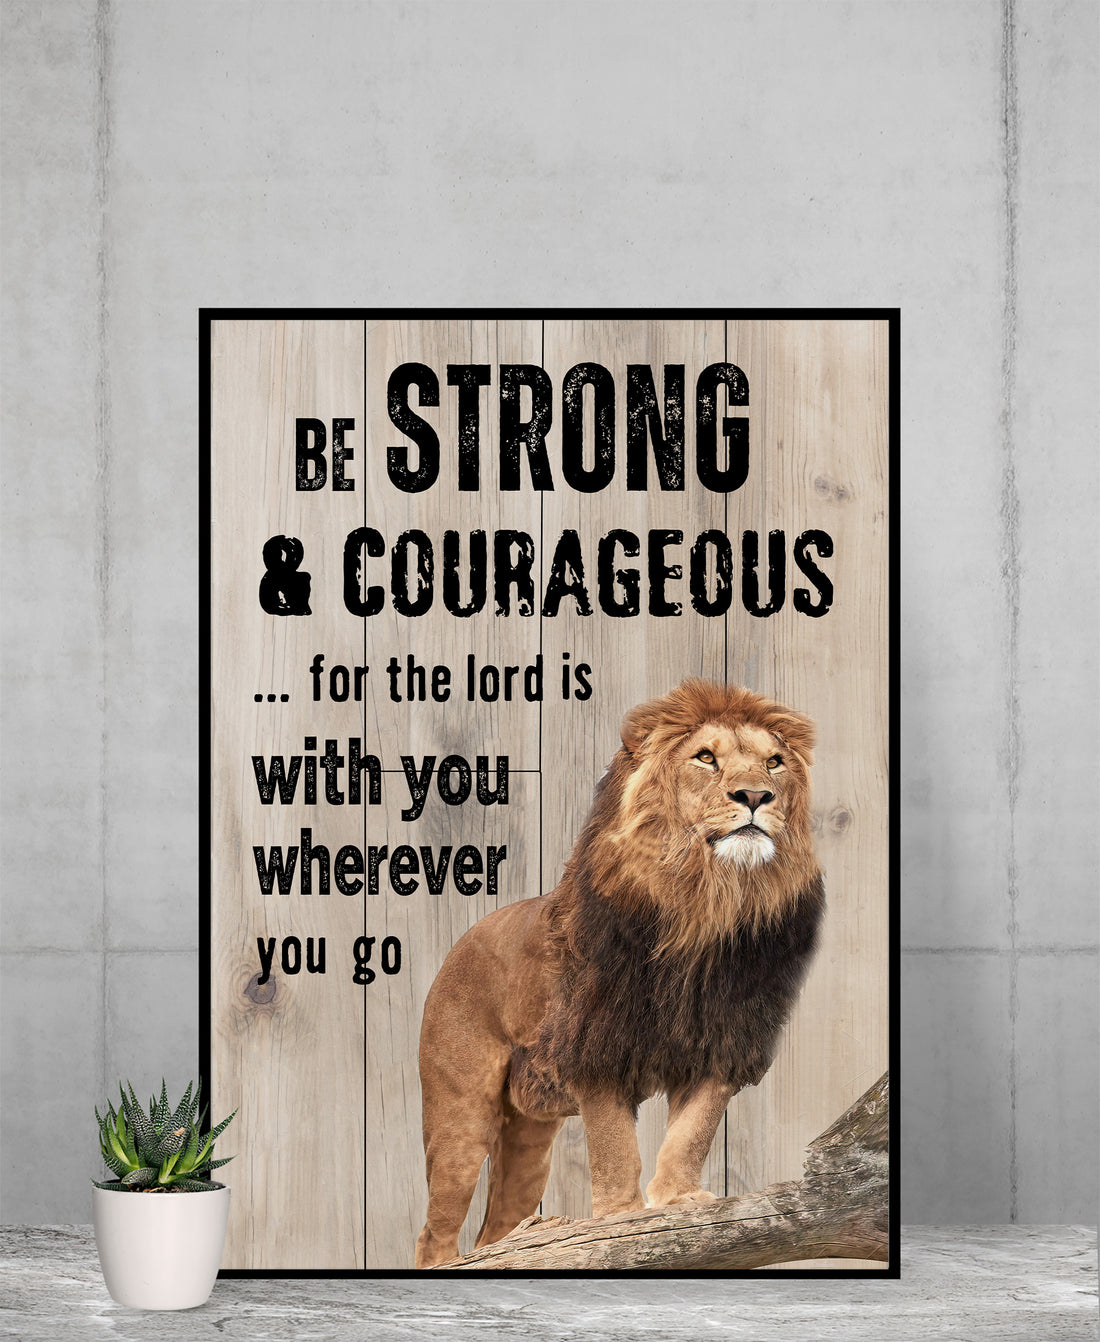 Wall Art Inspirational, Be Strong And Courageous, Lion Art, Lion Wall Art, Inspirational Quotes For Success, Office Decorations